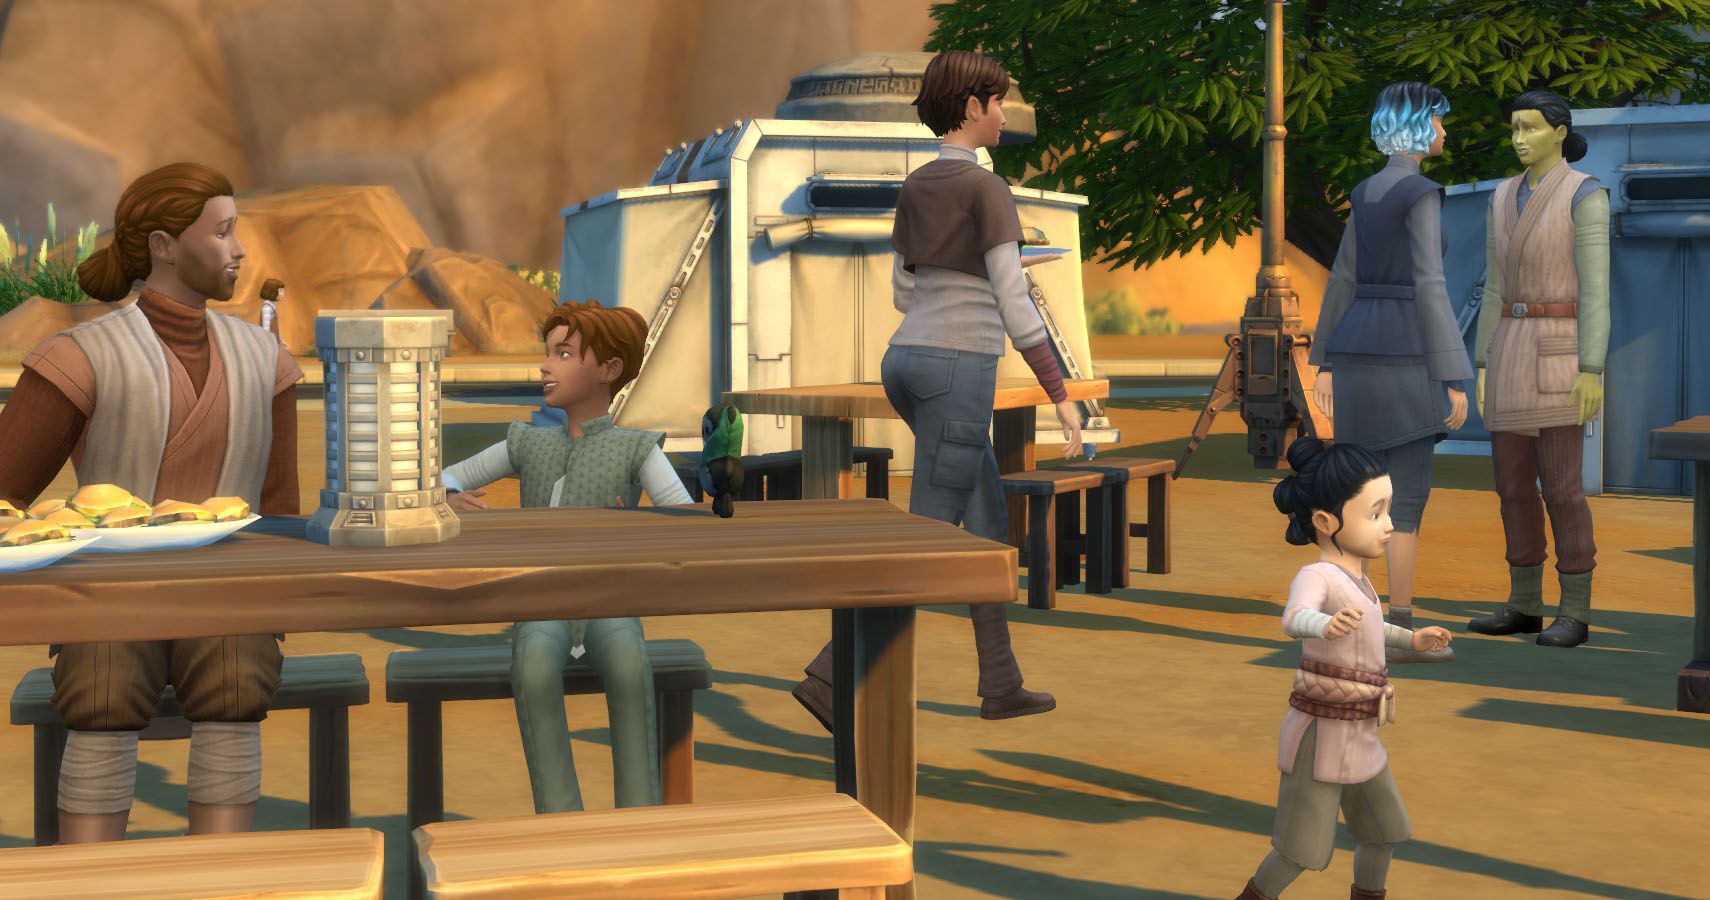 The Sims 4 Journey To Batuu Review Your Focus Determines Your Reality